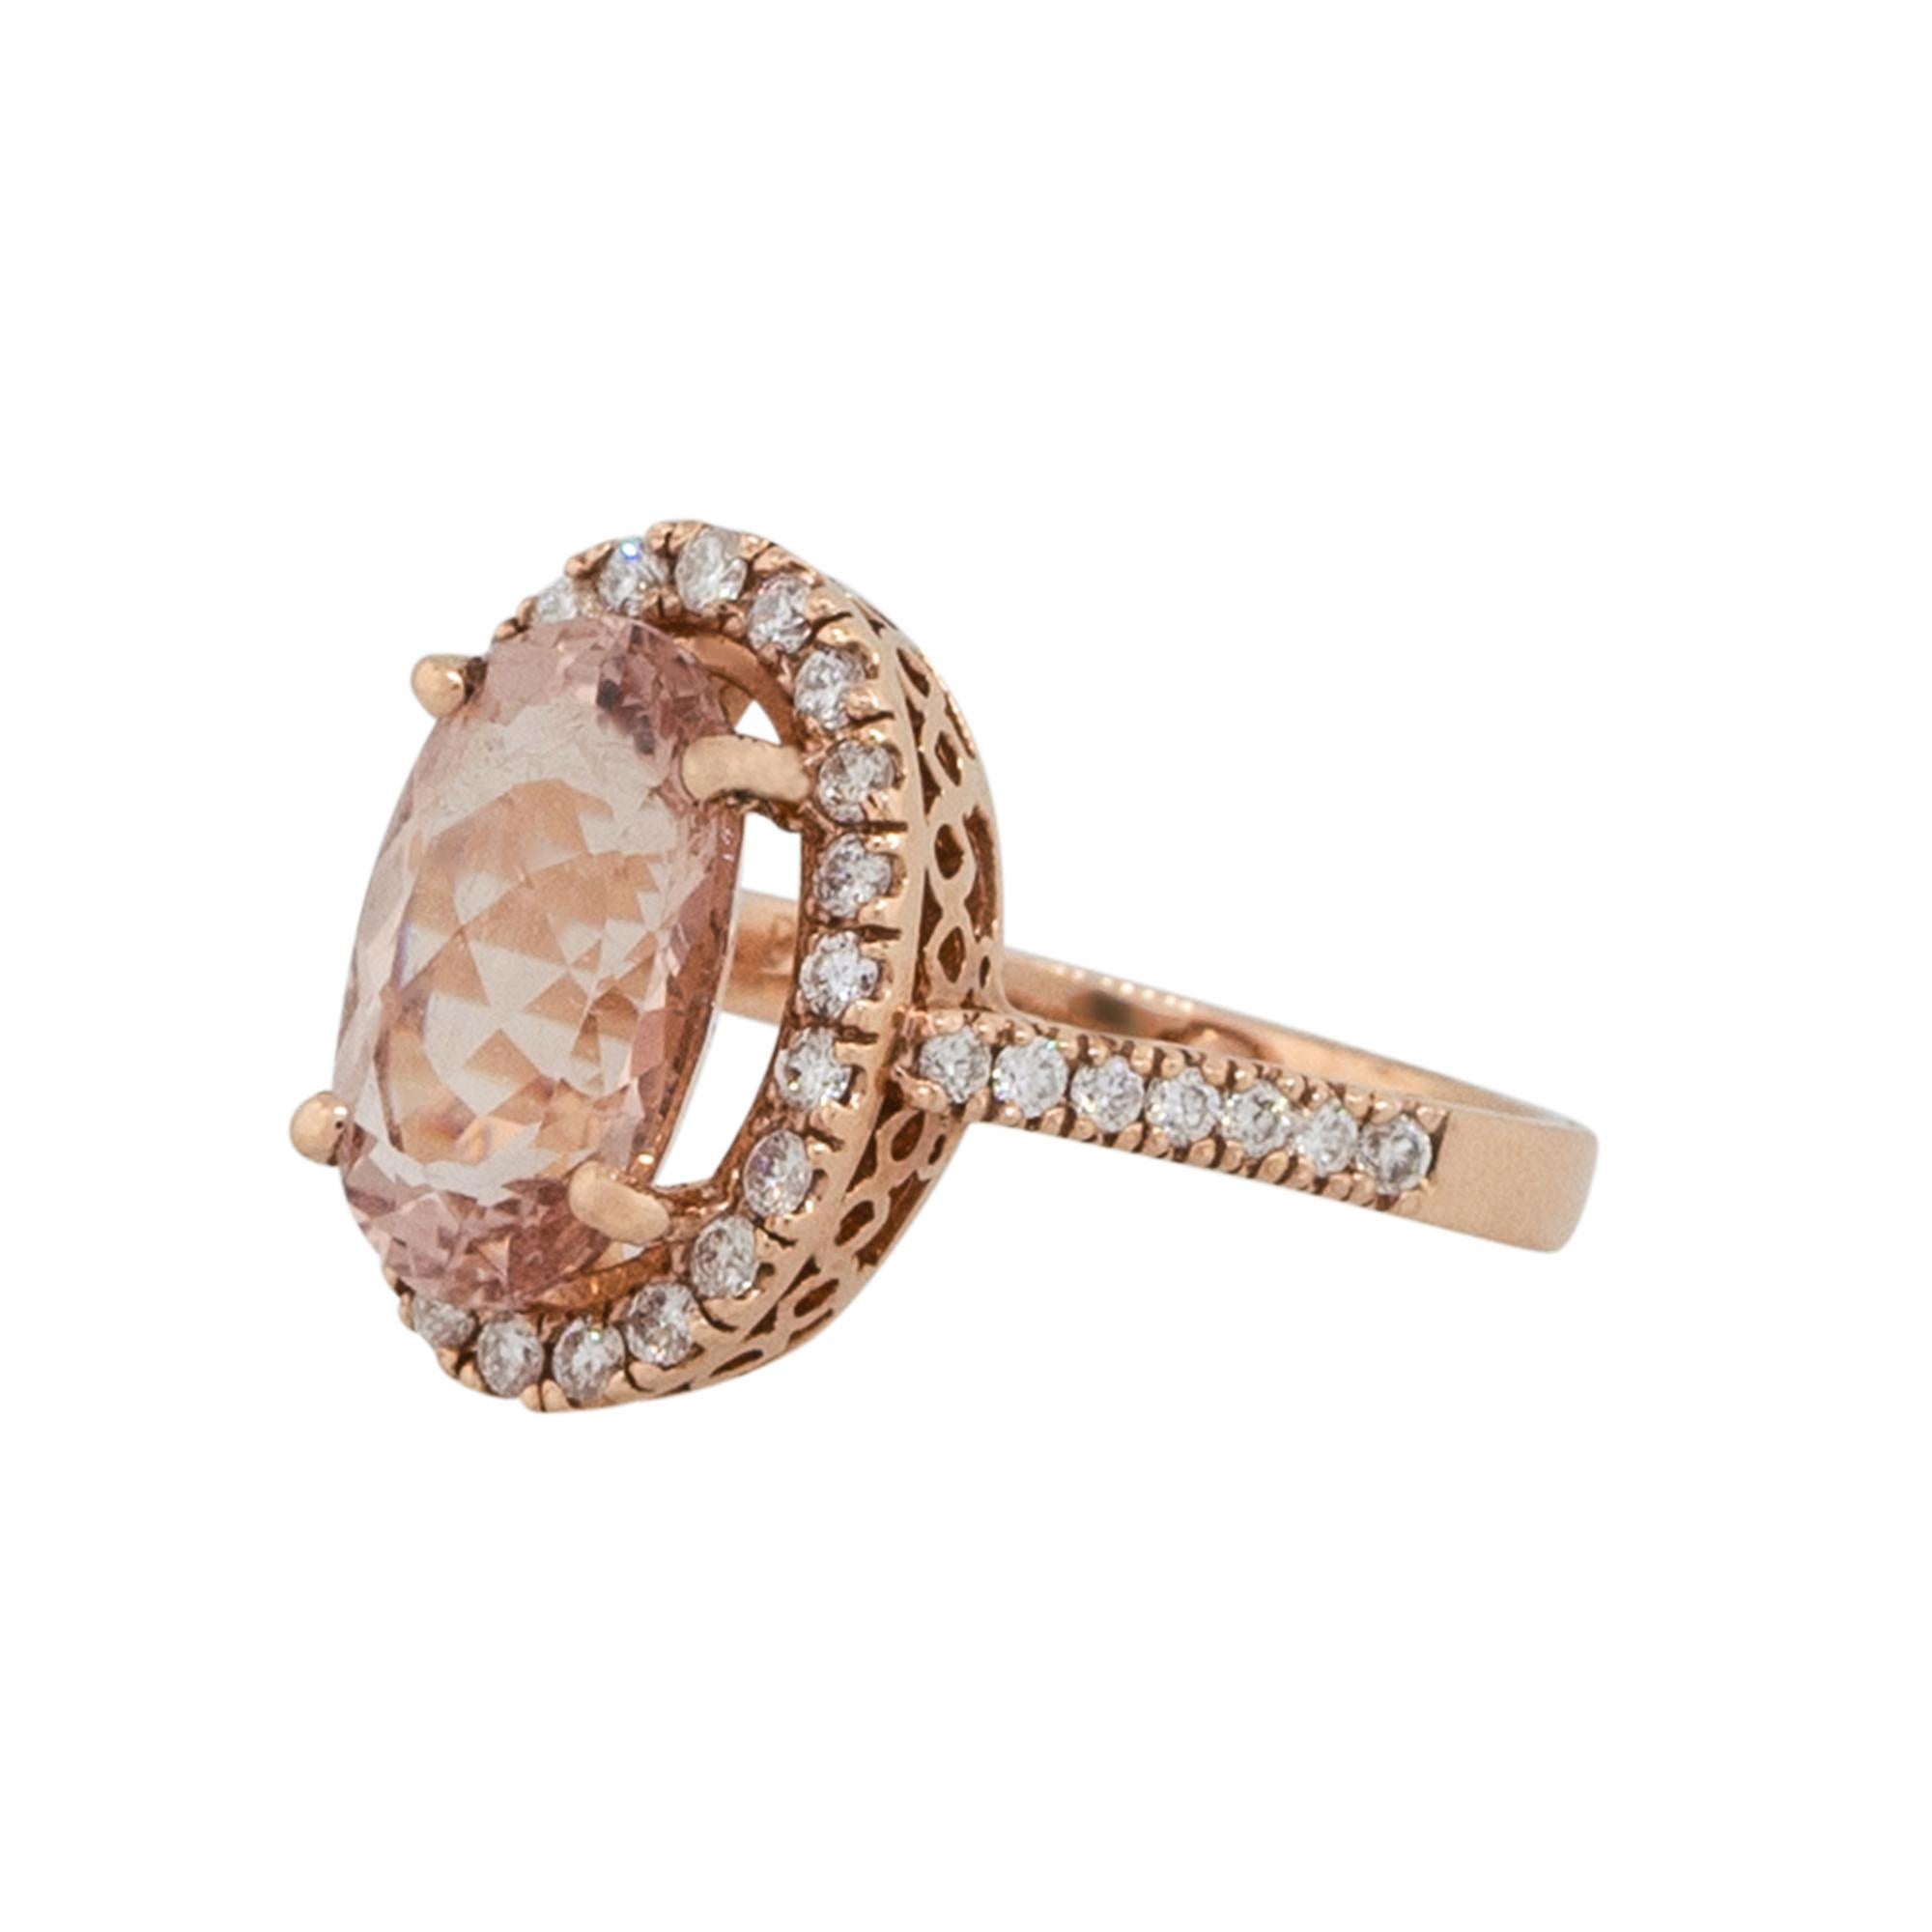 Material: 14k Rose Gold
Diamond Details: Approx. 0.61ctw of round cut Diamonds. Diamonds are H in color and VS in clarity
Gemstone Details: Approx. 4.39ctw oval shape Morganite gemstone
Size: 7.25
Total weight: 6.1g (3.9dwt)
Measurements: 0.75